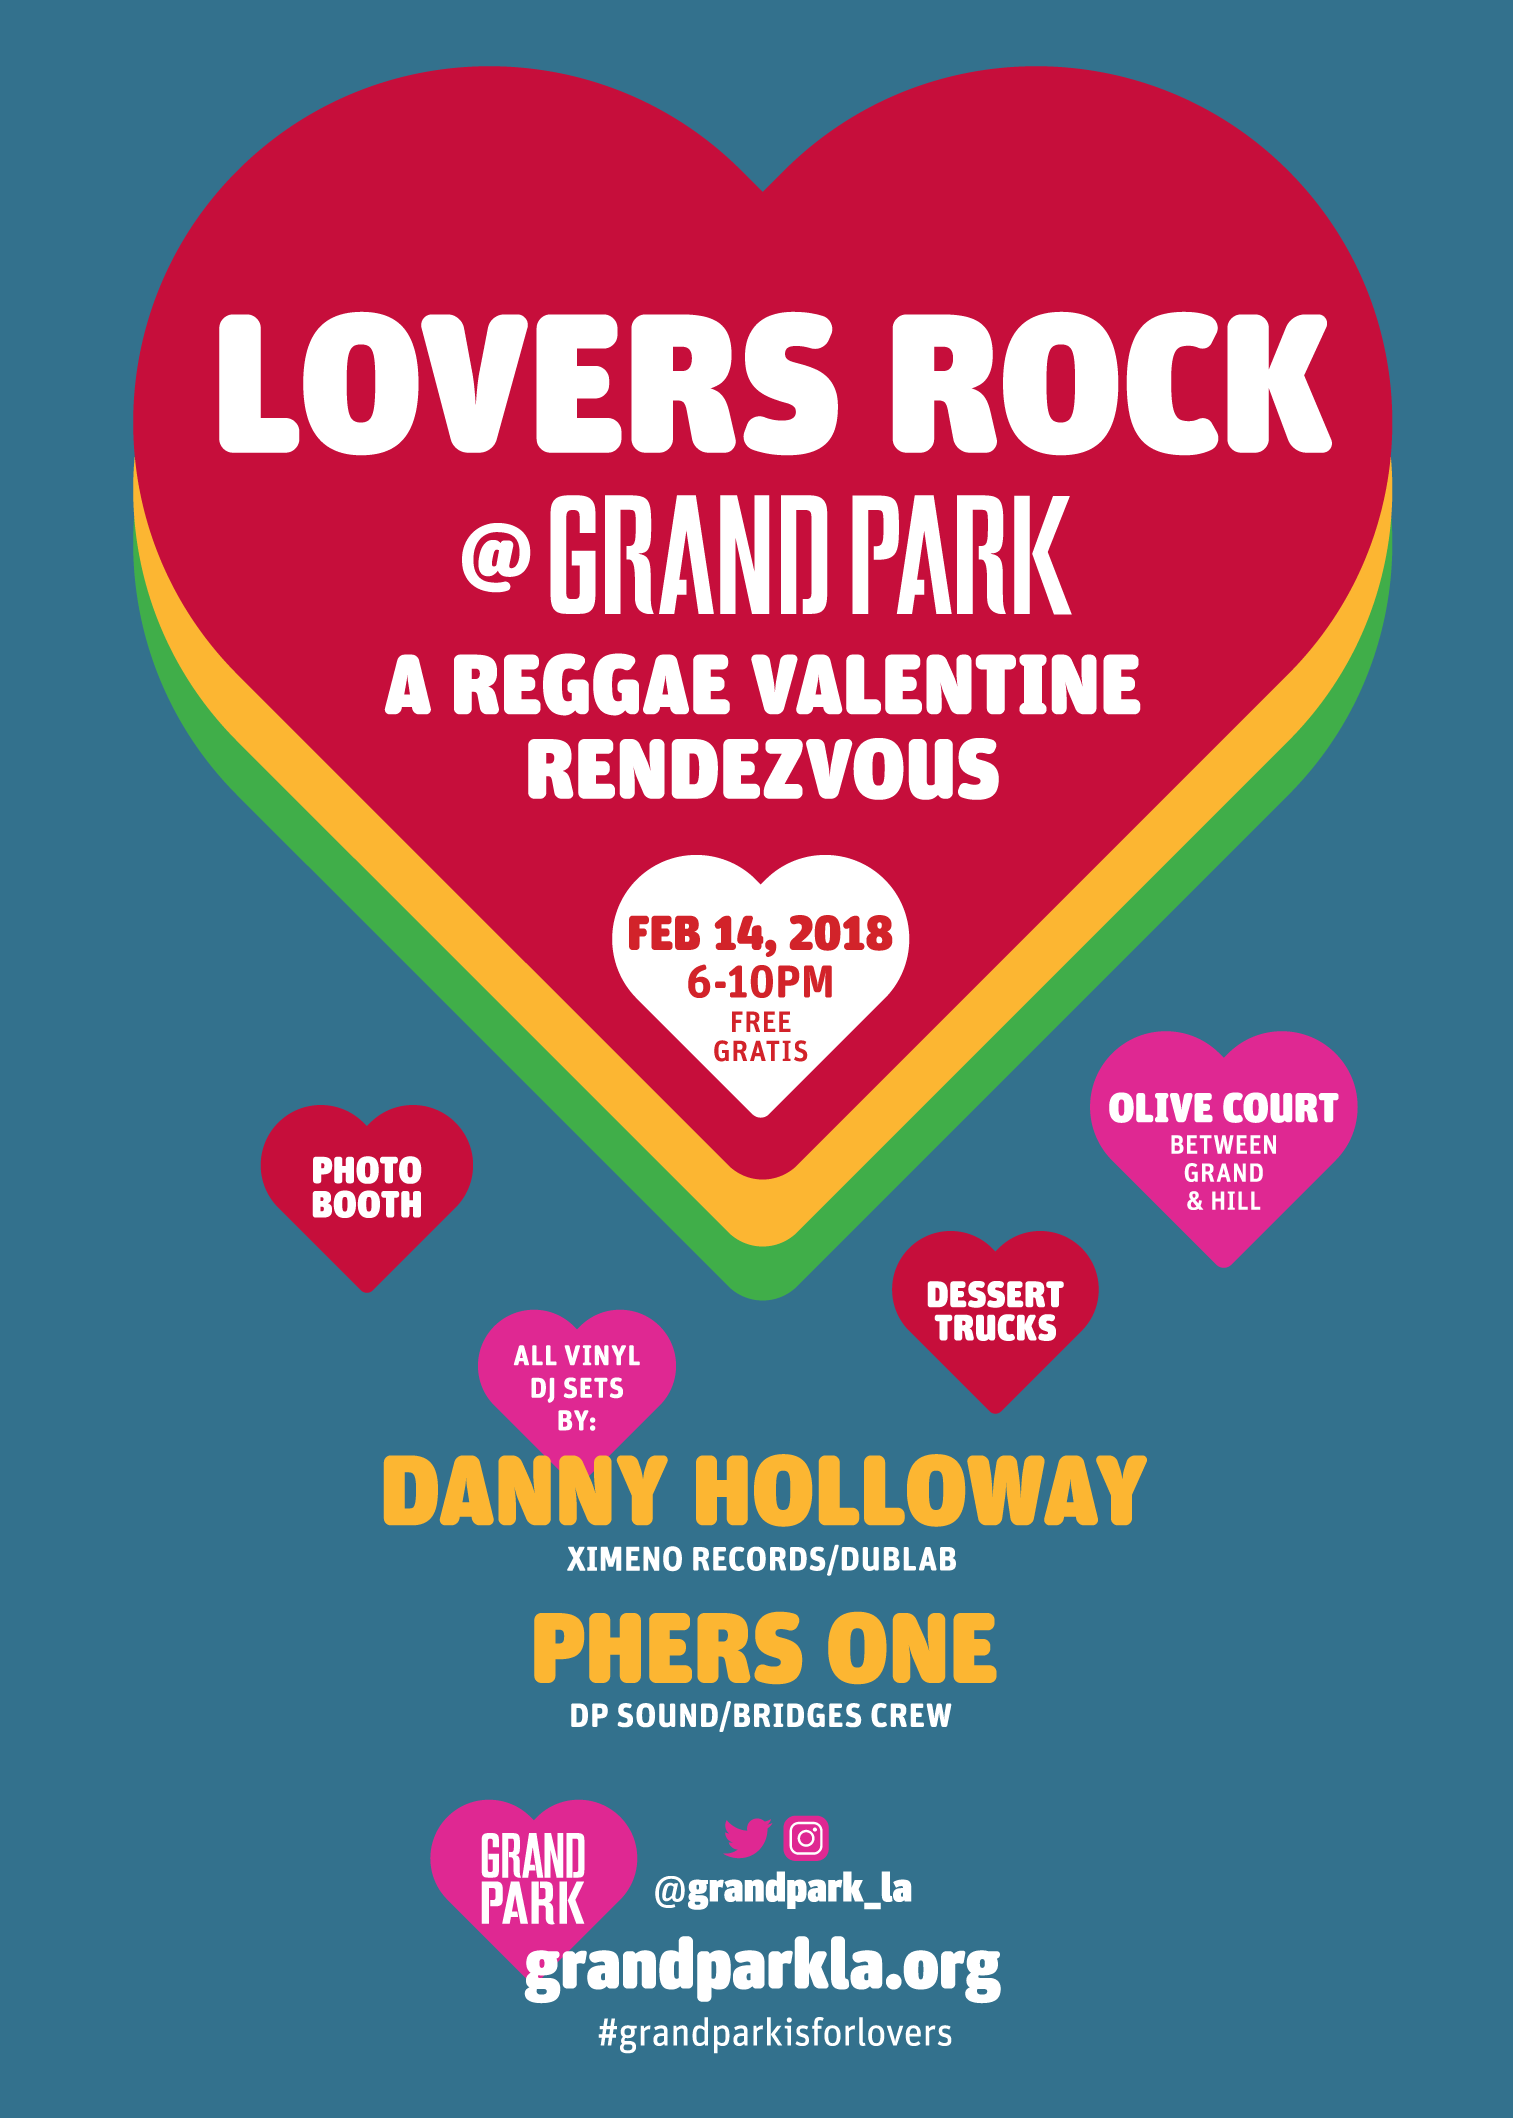 LOVERS ROCK @ GRAND PARK: A Reggae Valentine Rendezvous @ Grand Park's Olive Court  | Los Angeles | California | United States